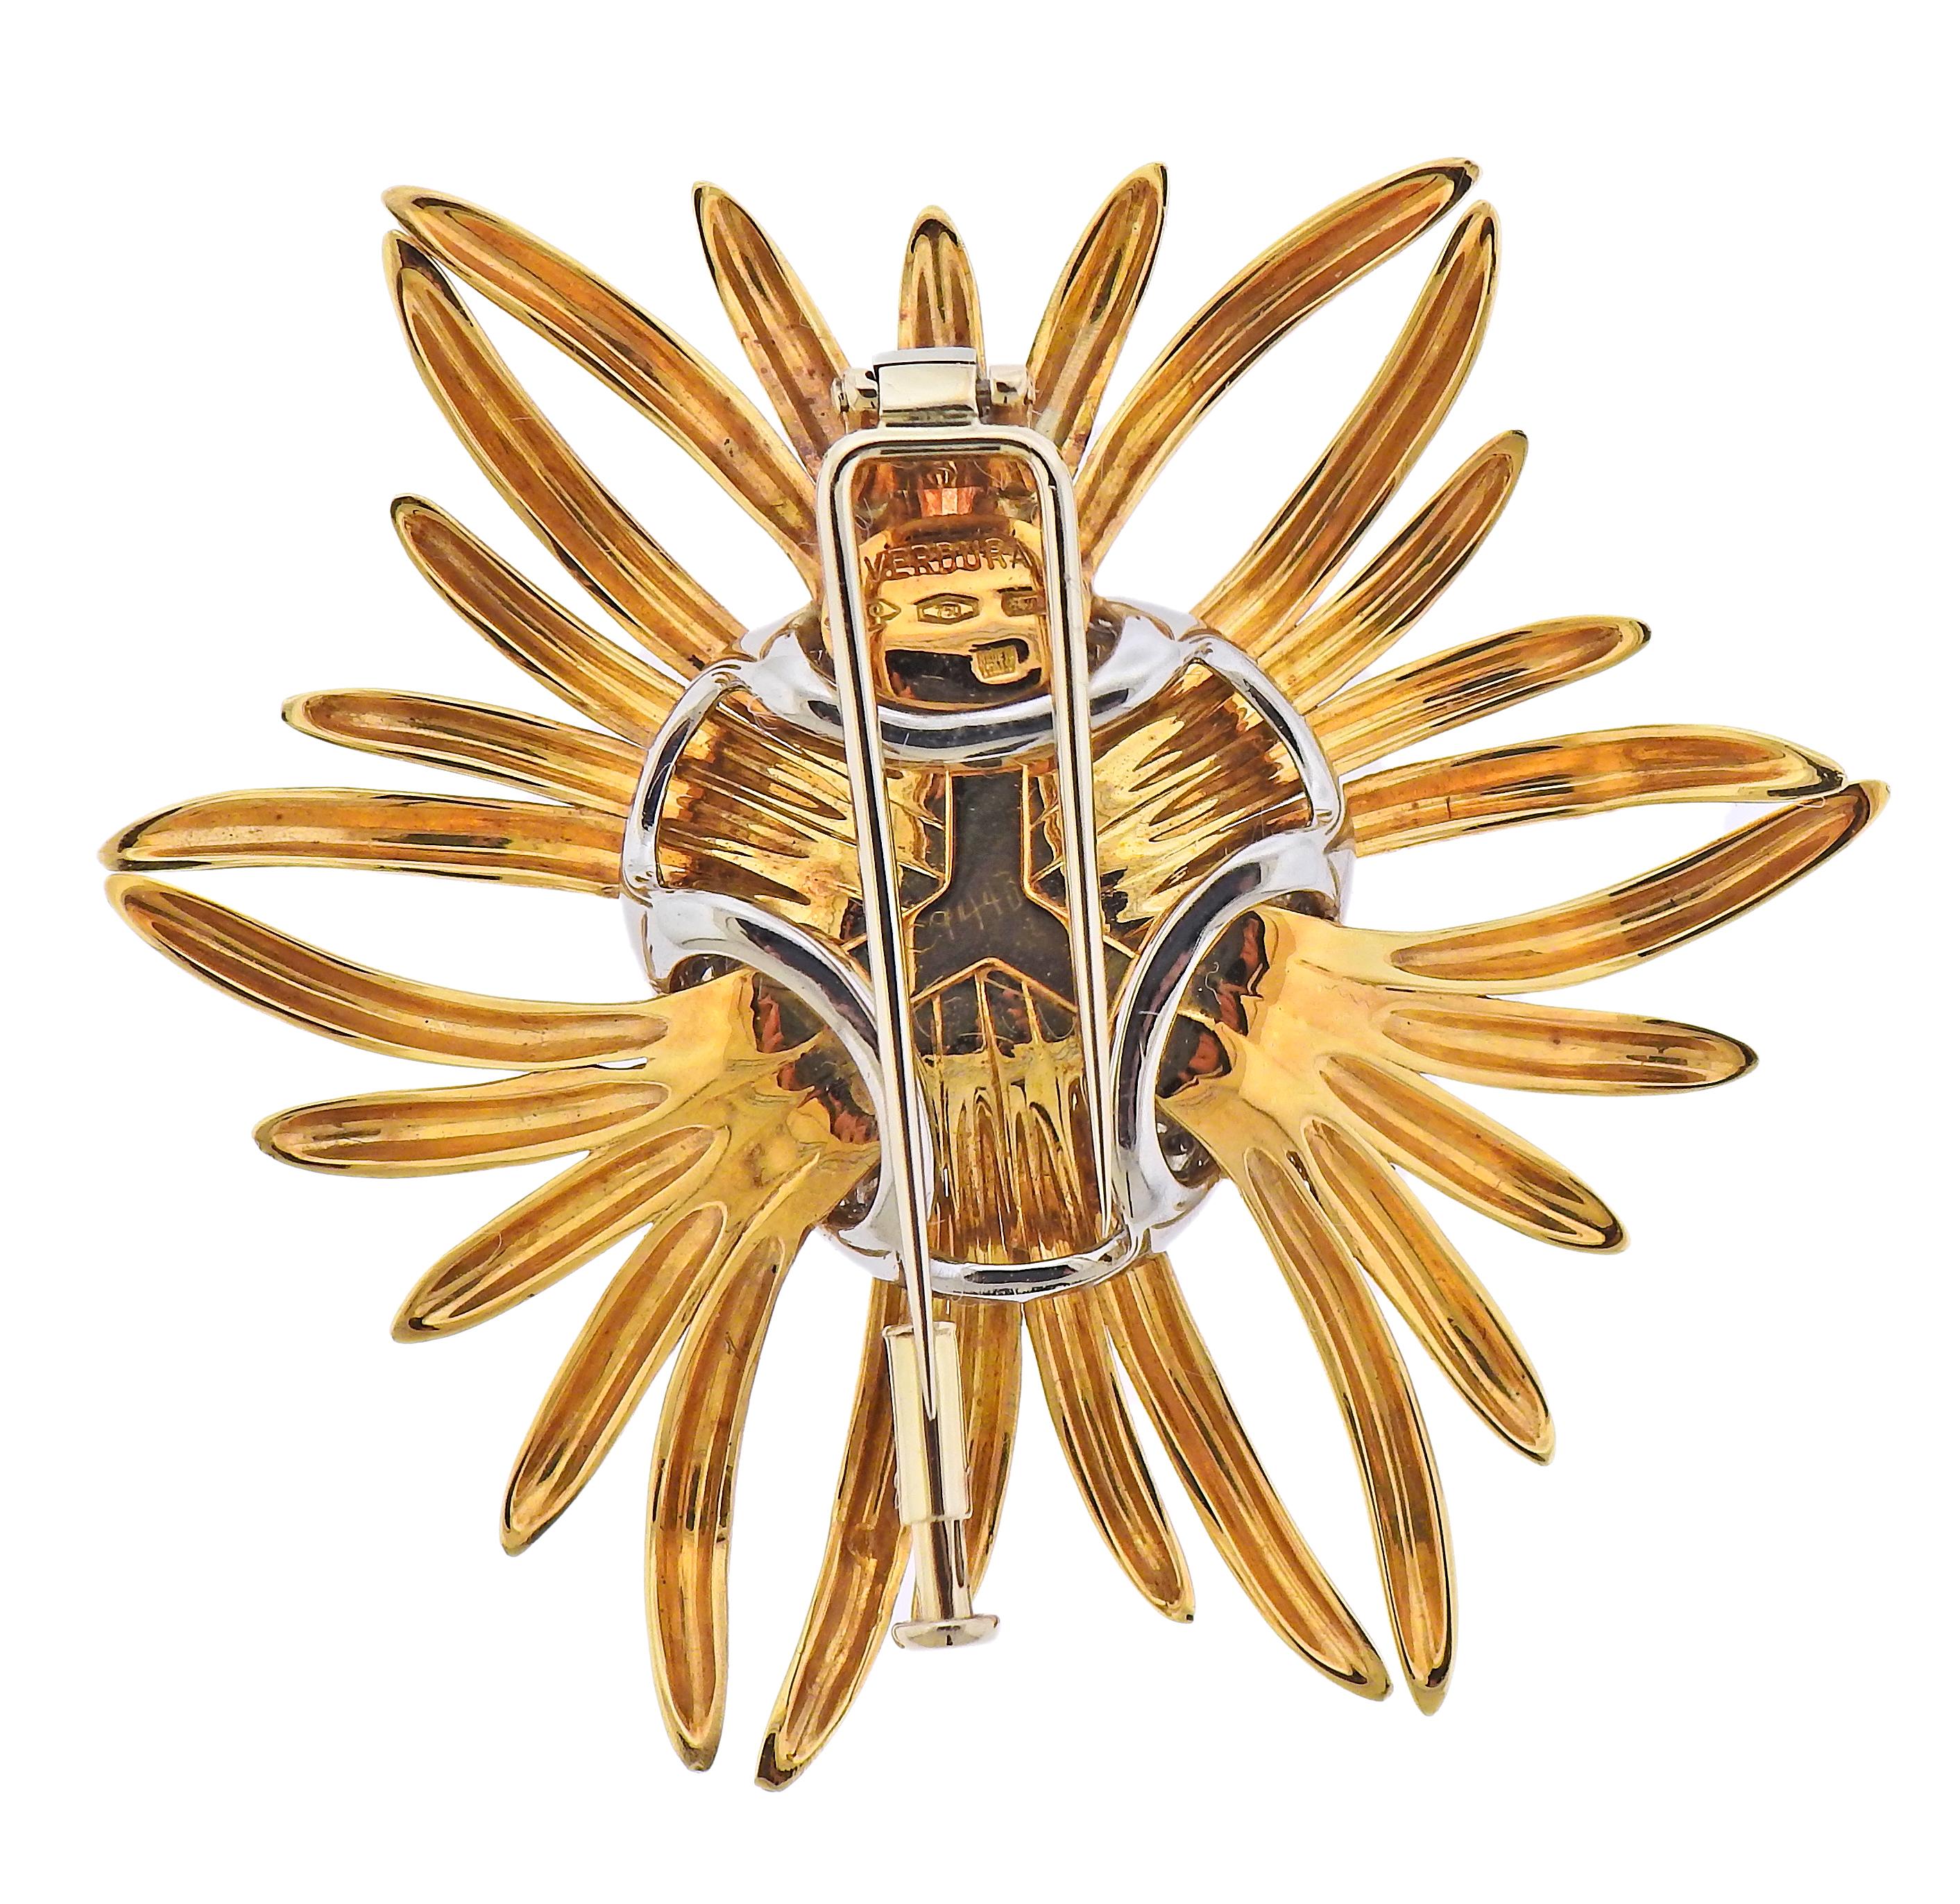 Large 18k gold brooch by Verdura. Set with approx. 1.20cts in diamonds, the brooch measures 52mm x 58m. Comes in original Verdure box. Marked: Verdura, 750, made in Italy. Weight - 31.9 grams.